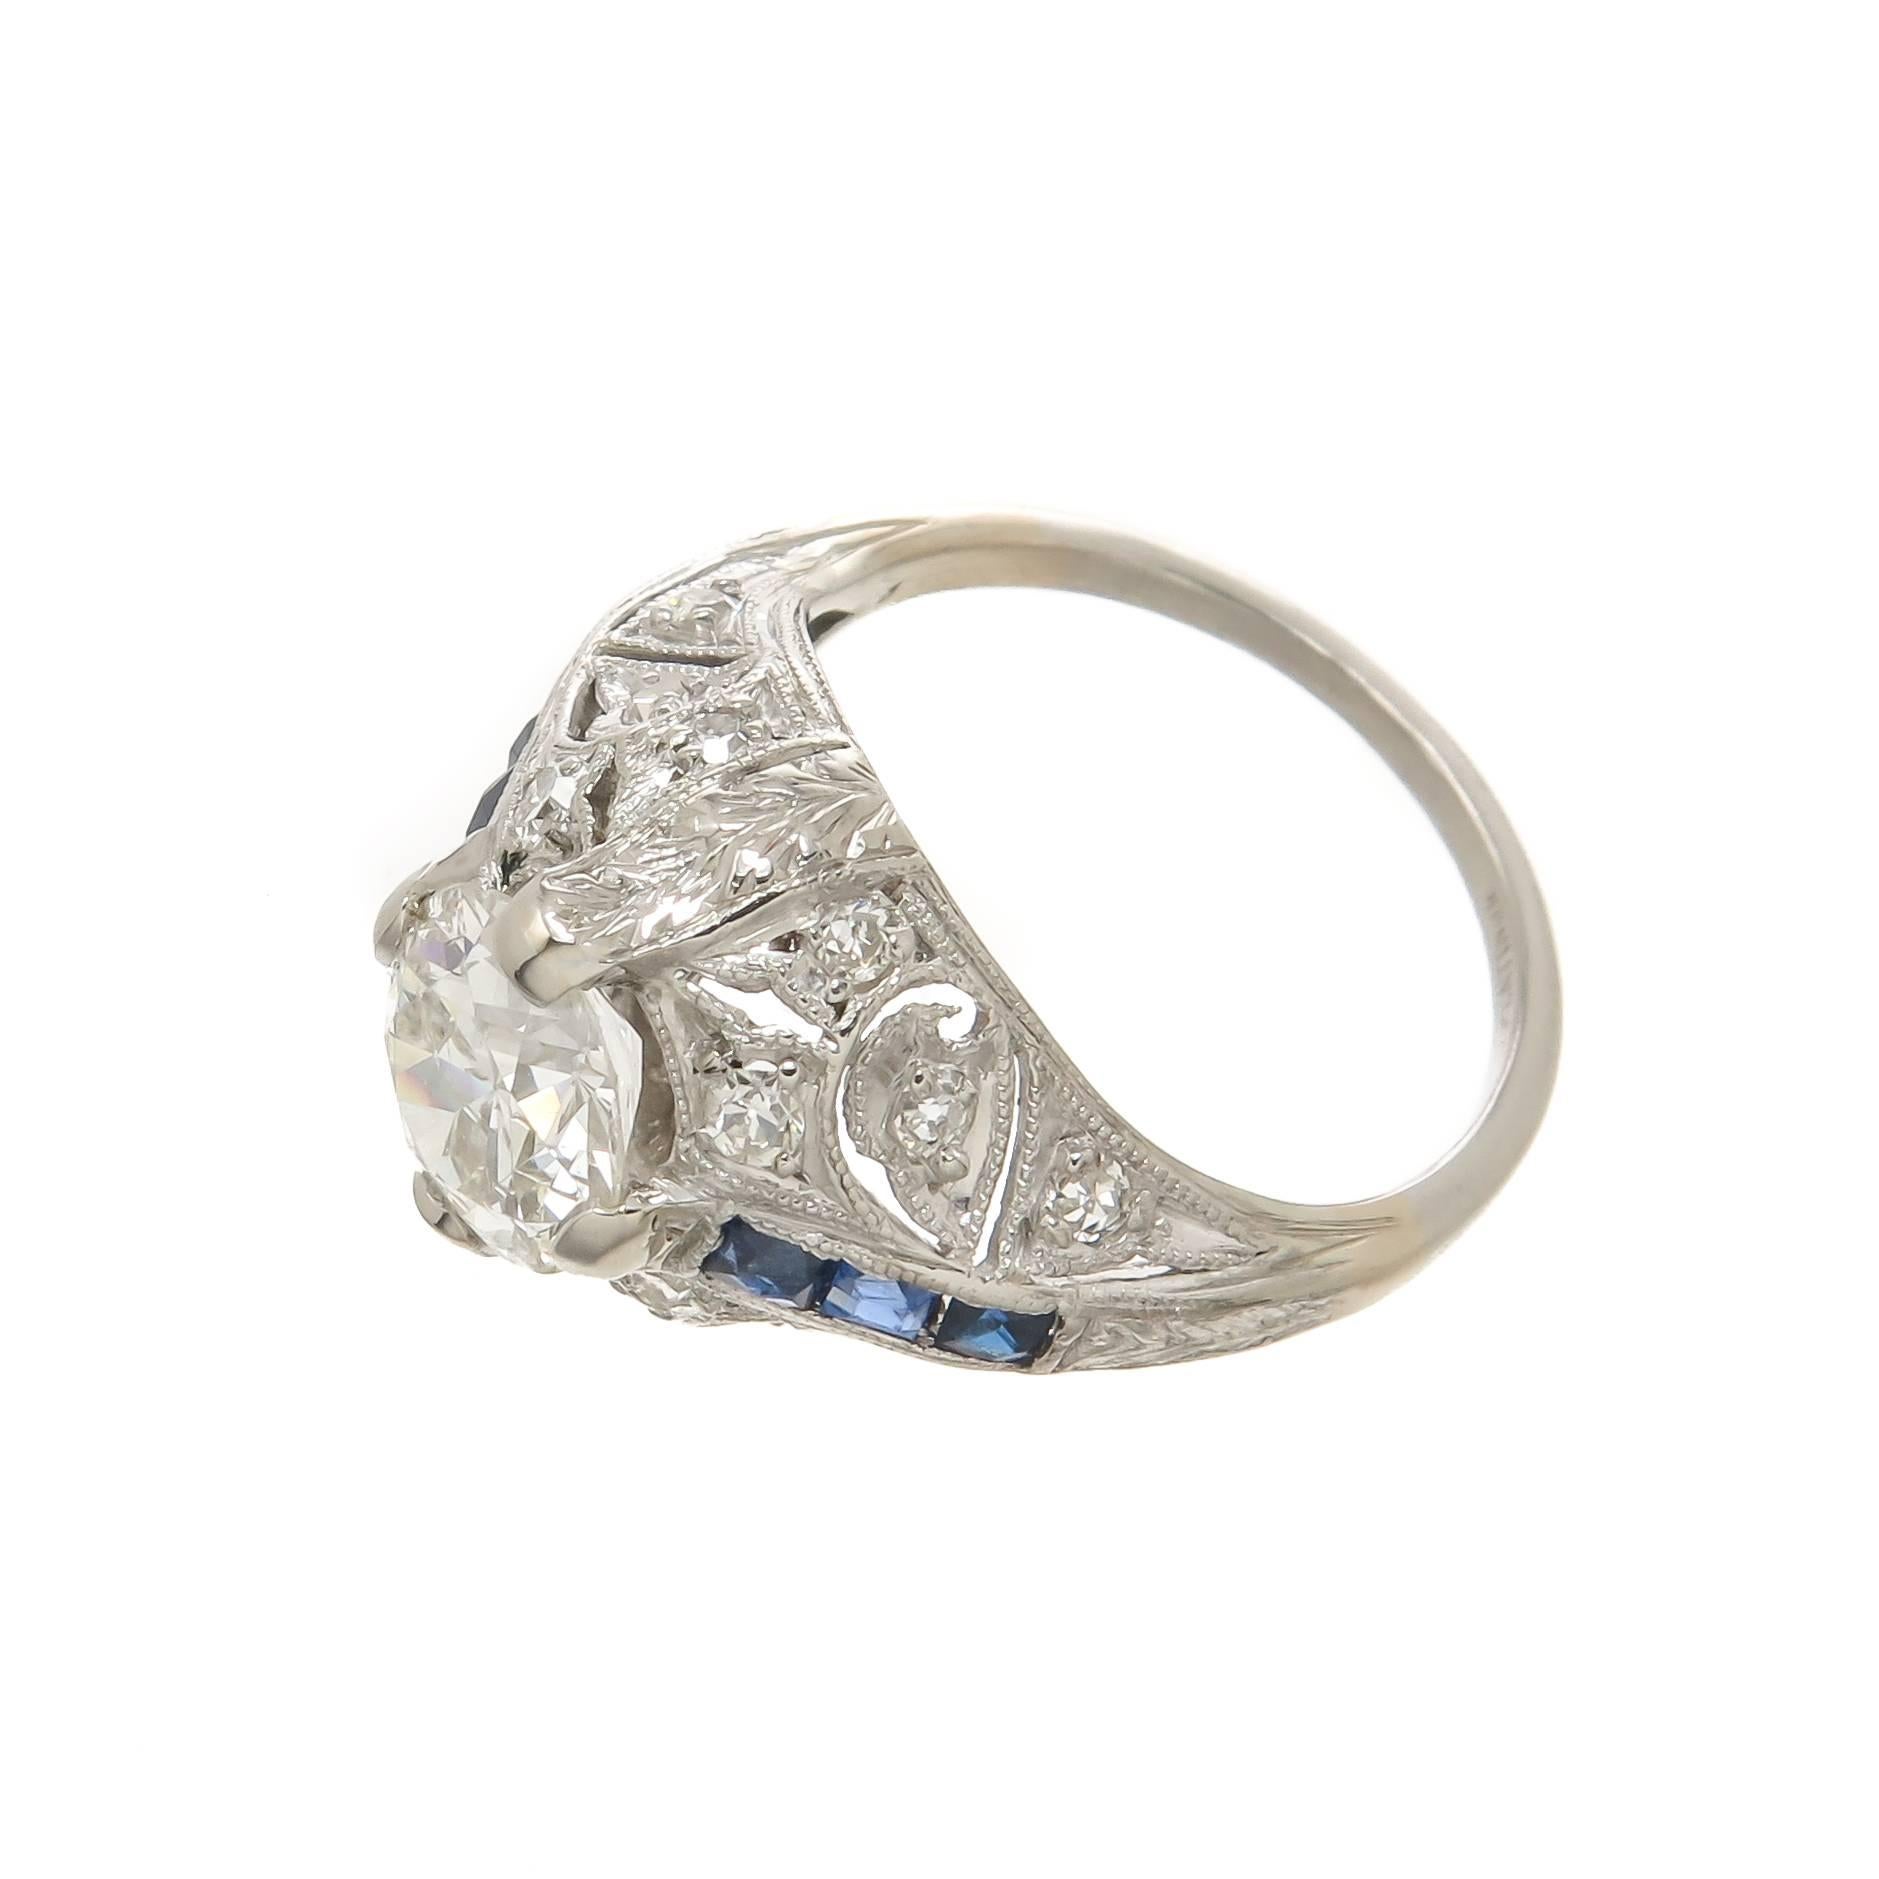 Circa 1930 Platinum Art Deco Engagement Ring, centrally set with a 1.27 Carat European cut Diamond Grading as I in color and SI2 in Clarity. Further set with smaller acs cent Diamonds, Baguette Sapphires and hand finished Gallery work. Finger size =